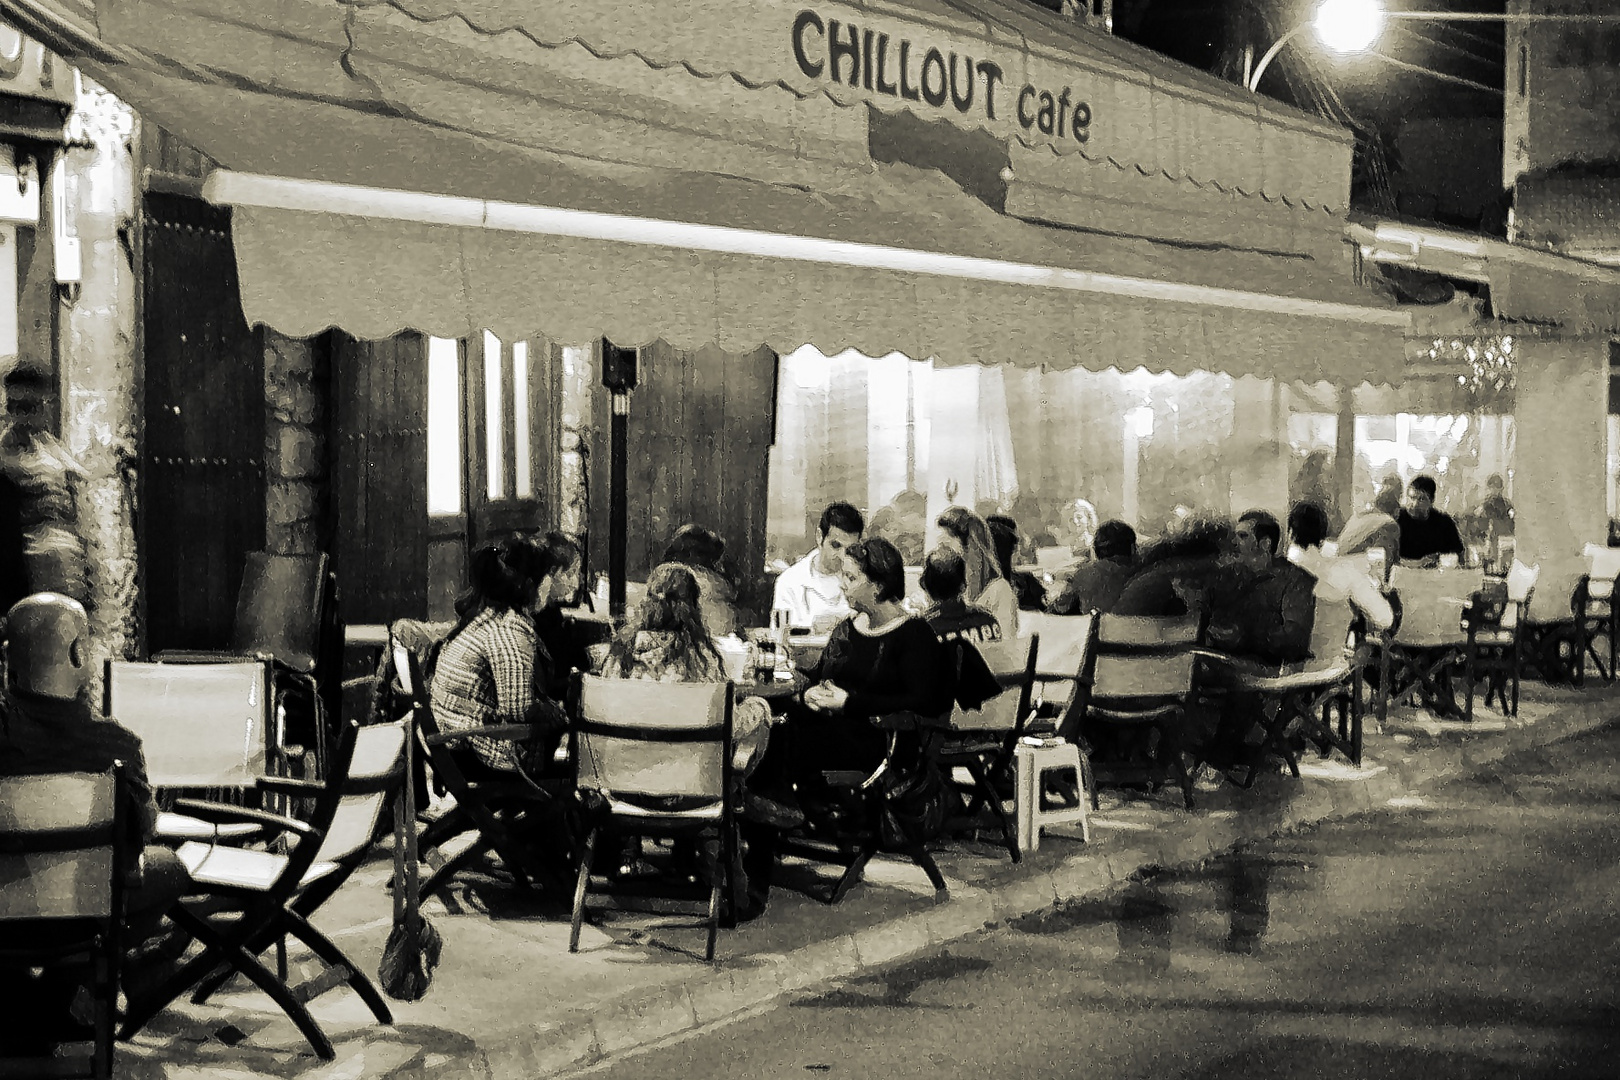 the CHILLOUT cafe